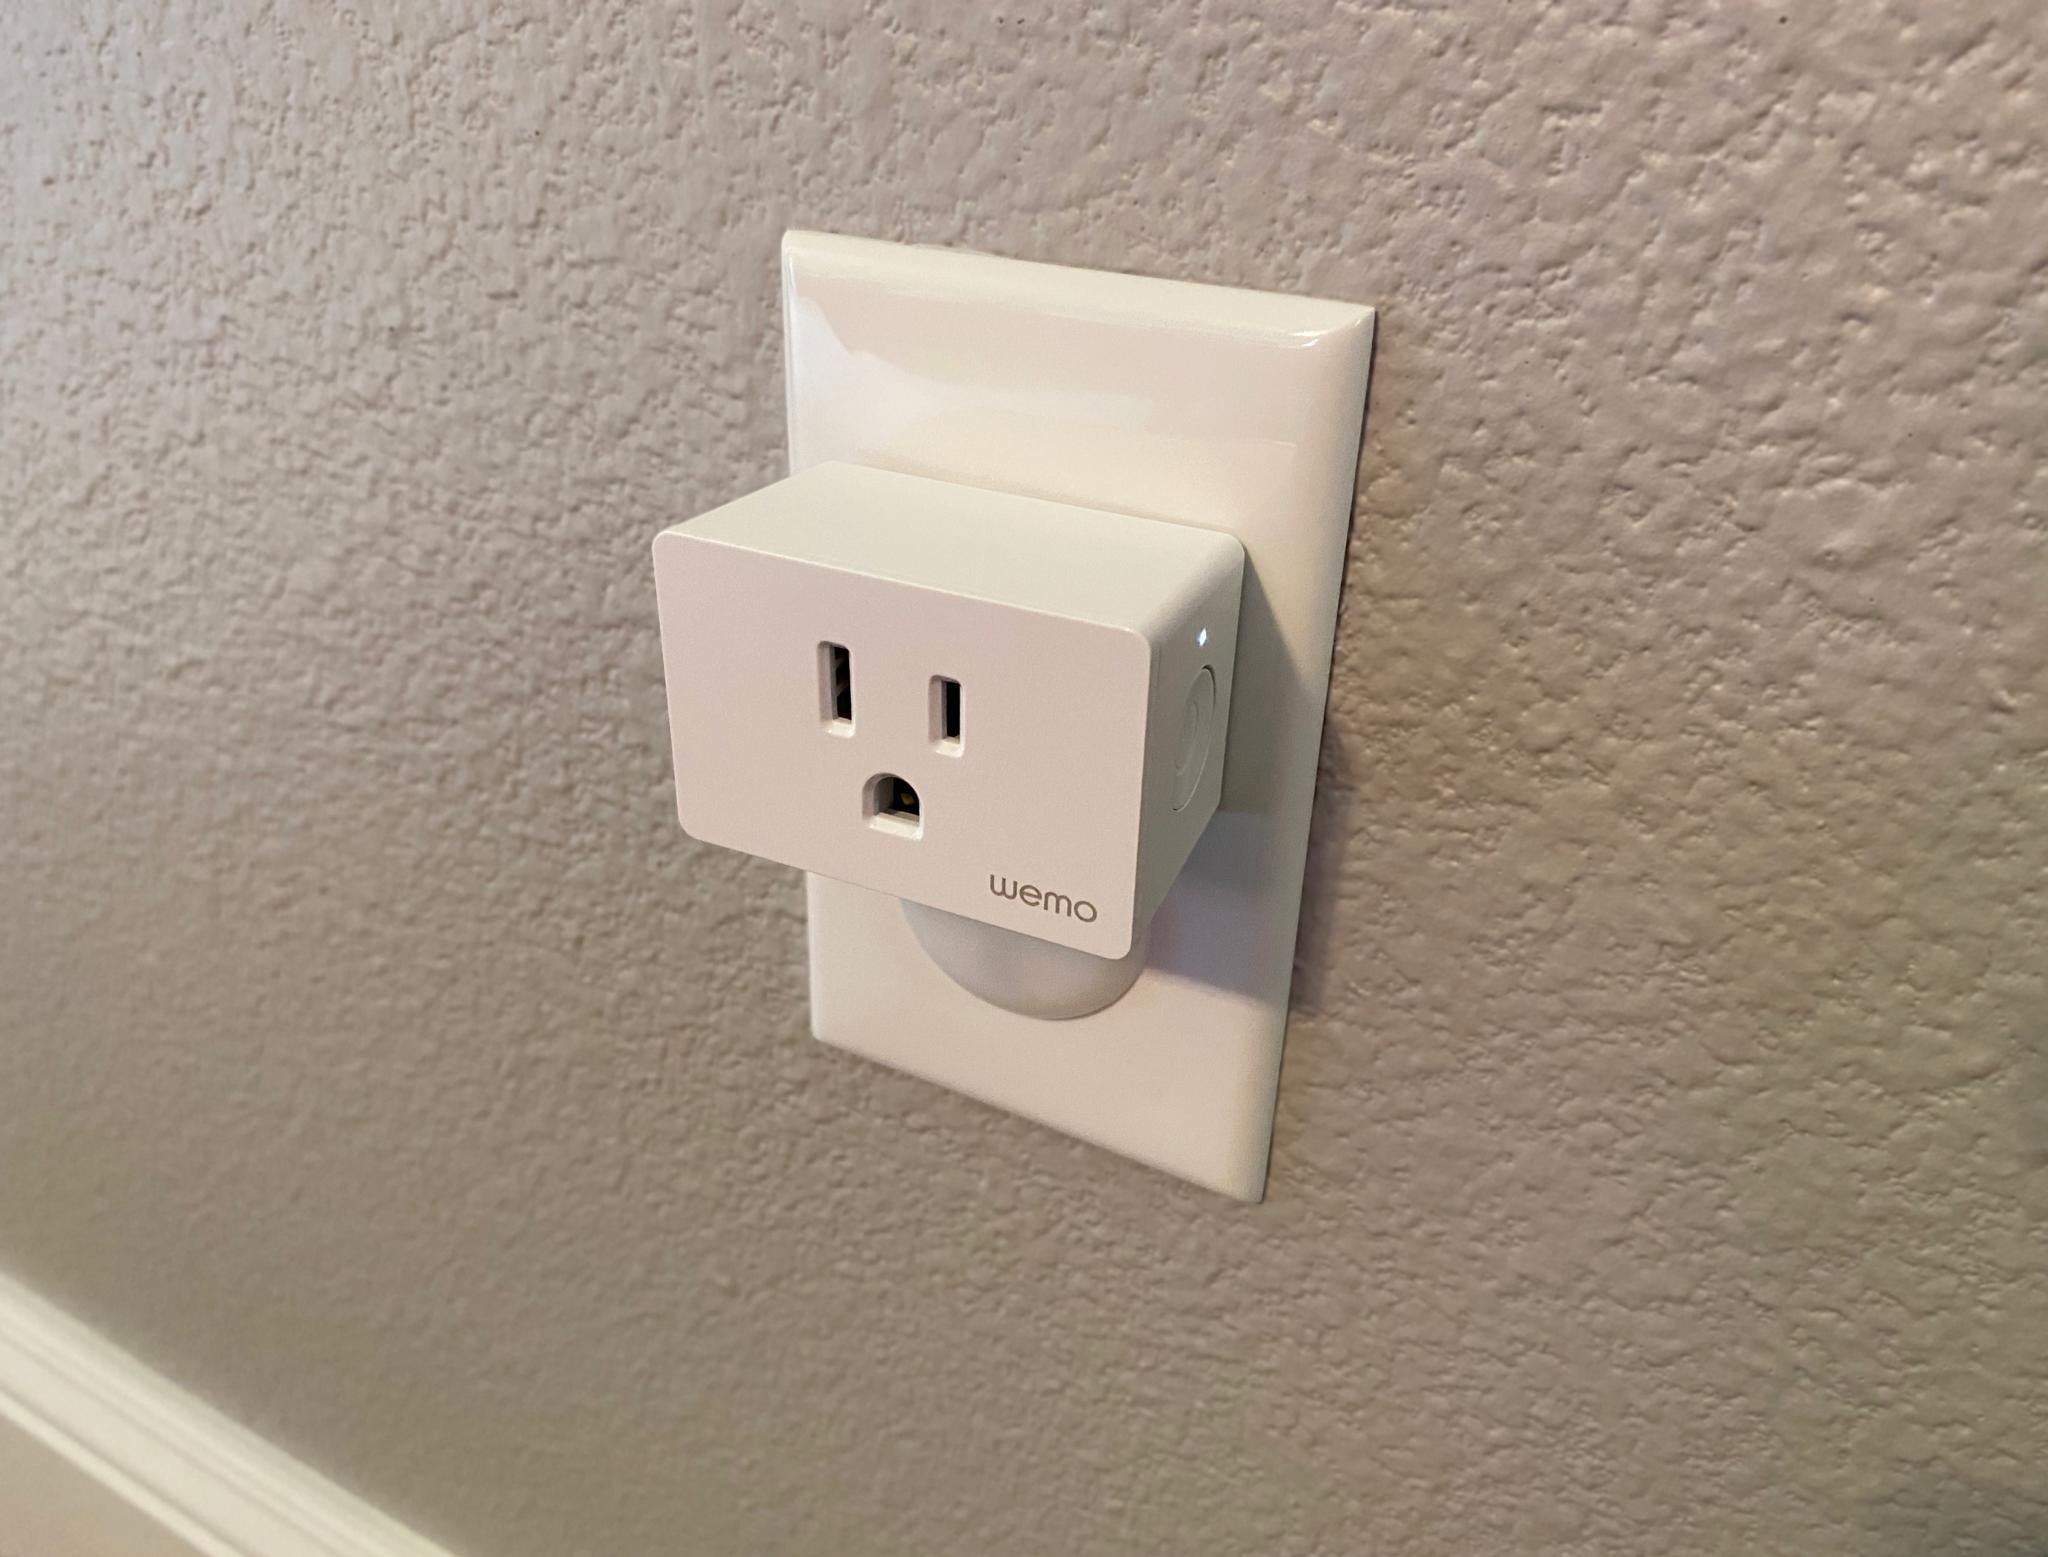 Belkin Wemo WiFi Smart Plug review: made for Apple users